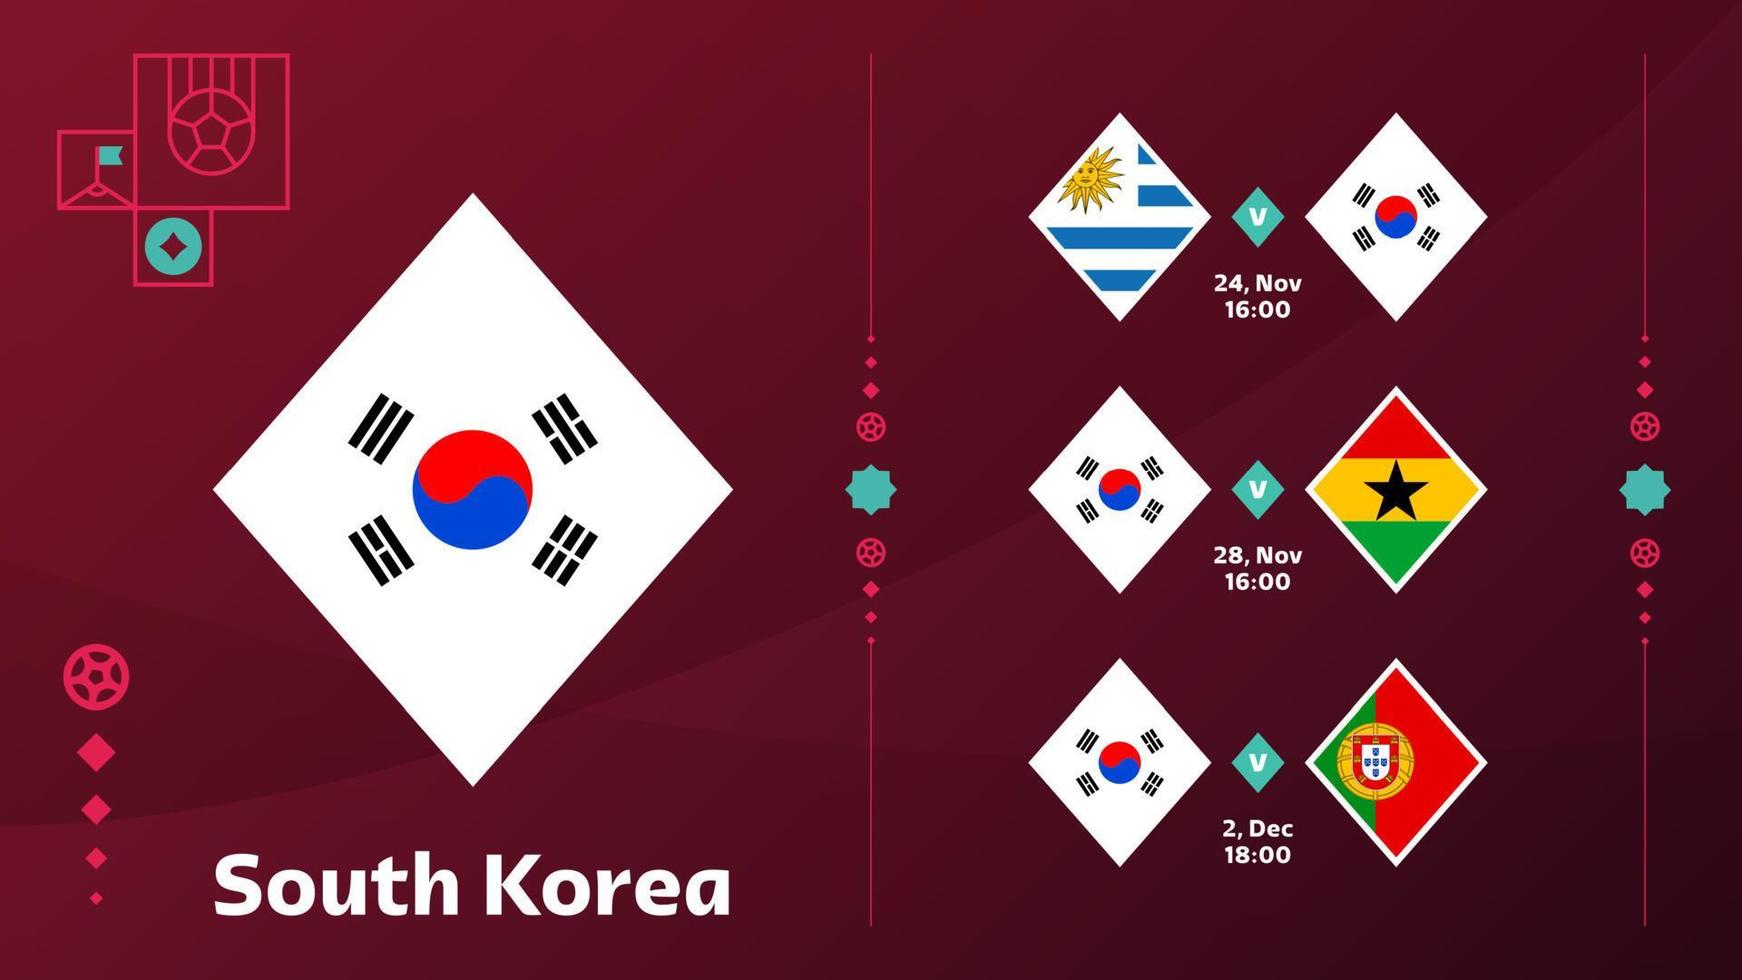 south korea national team Schedule matches in the final stage at the 2022 Football World Championship. Vector illustration of world football 2022 matches.